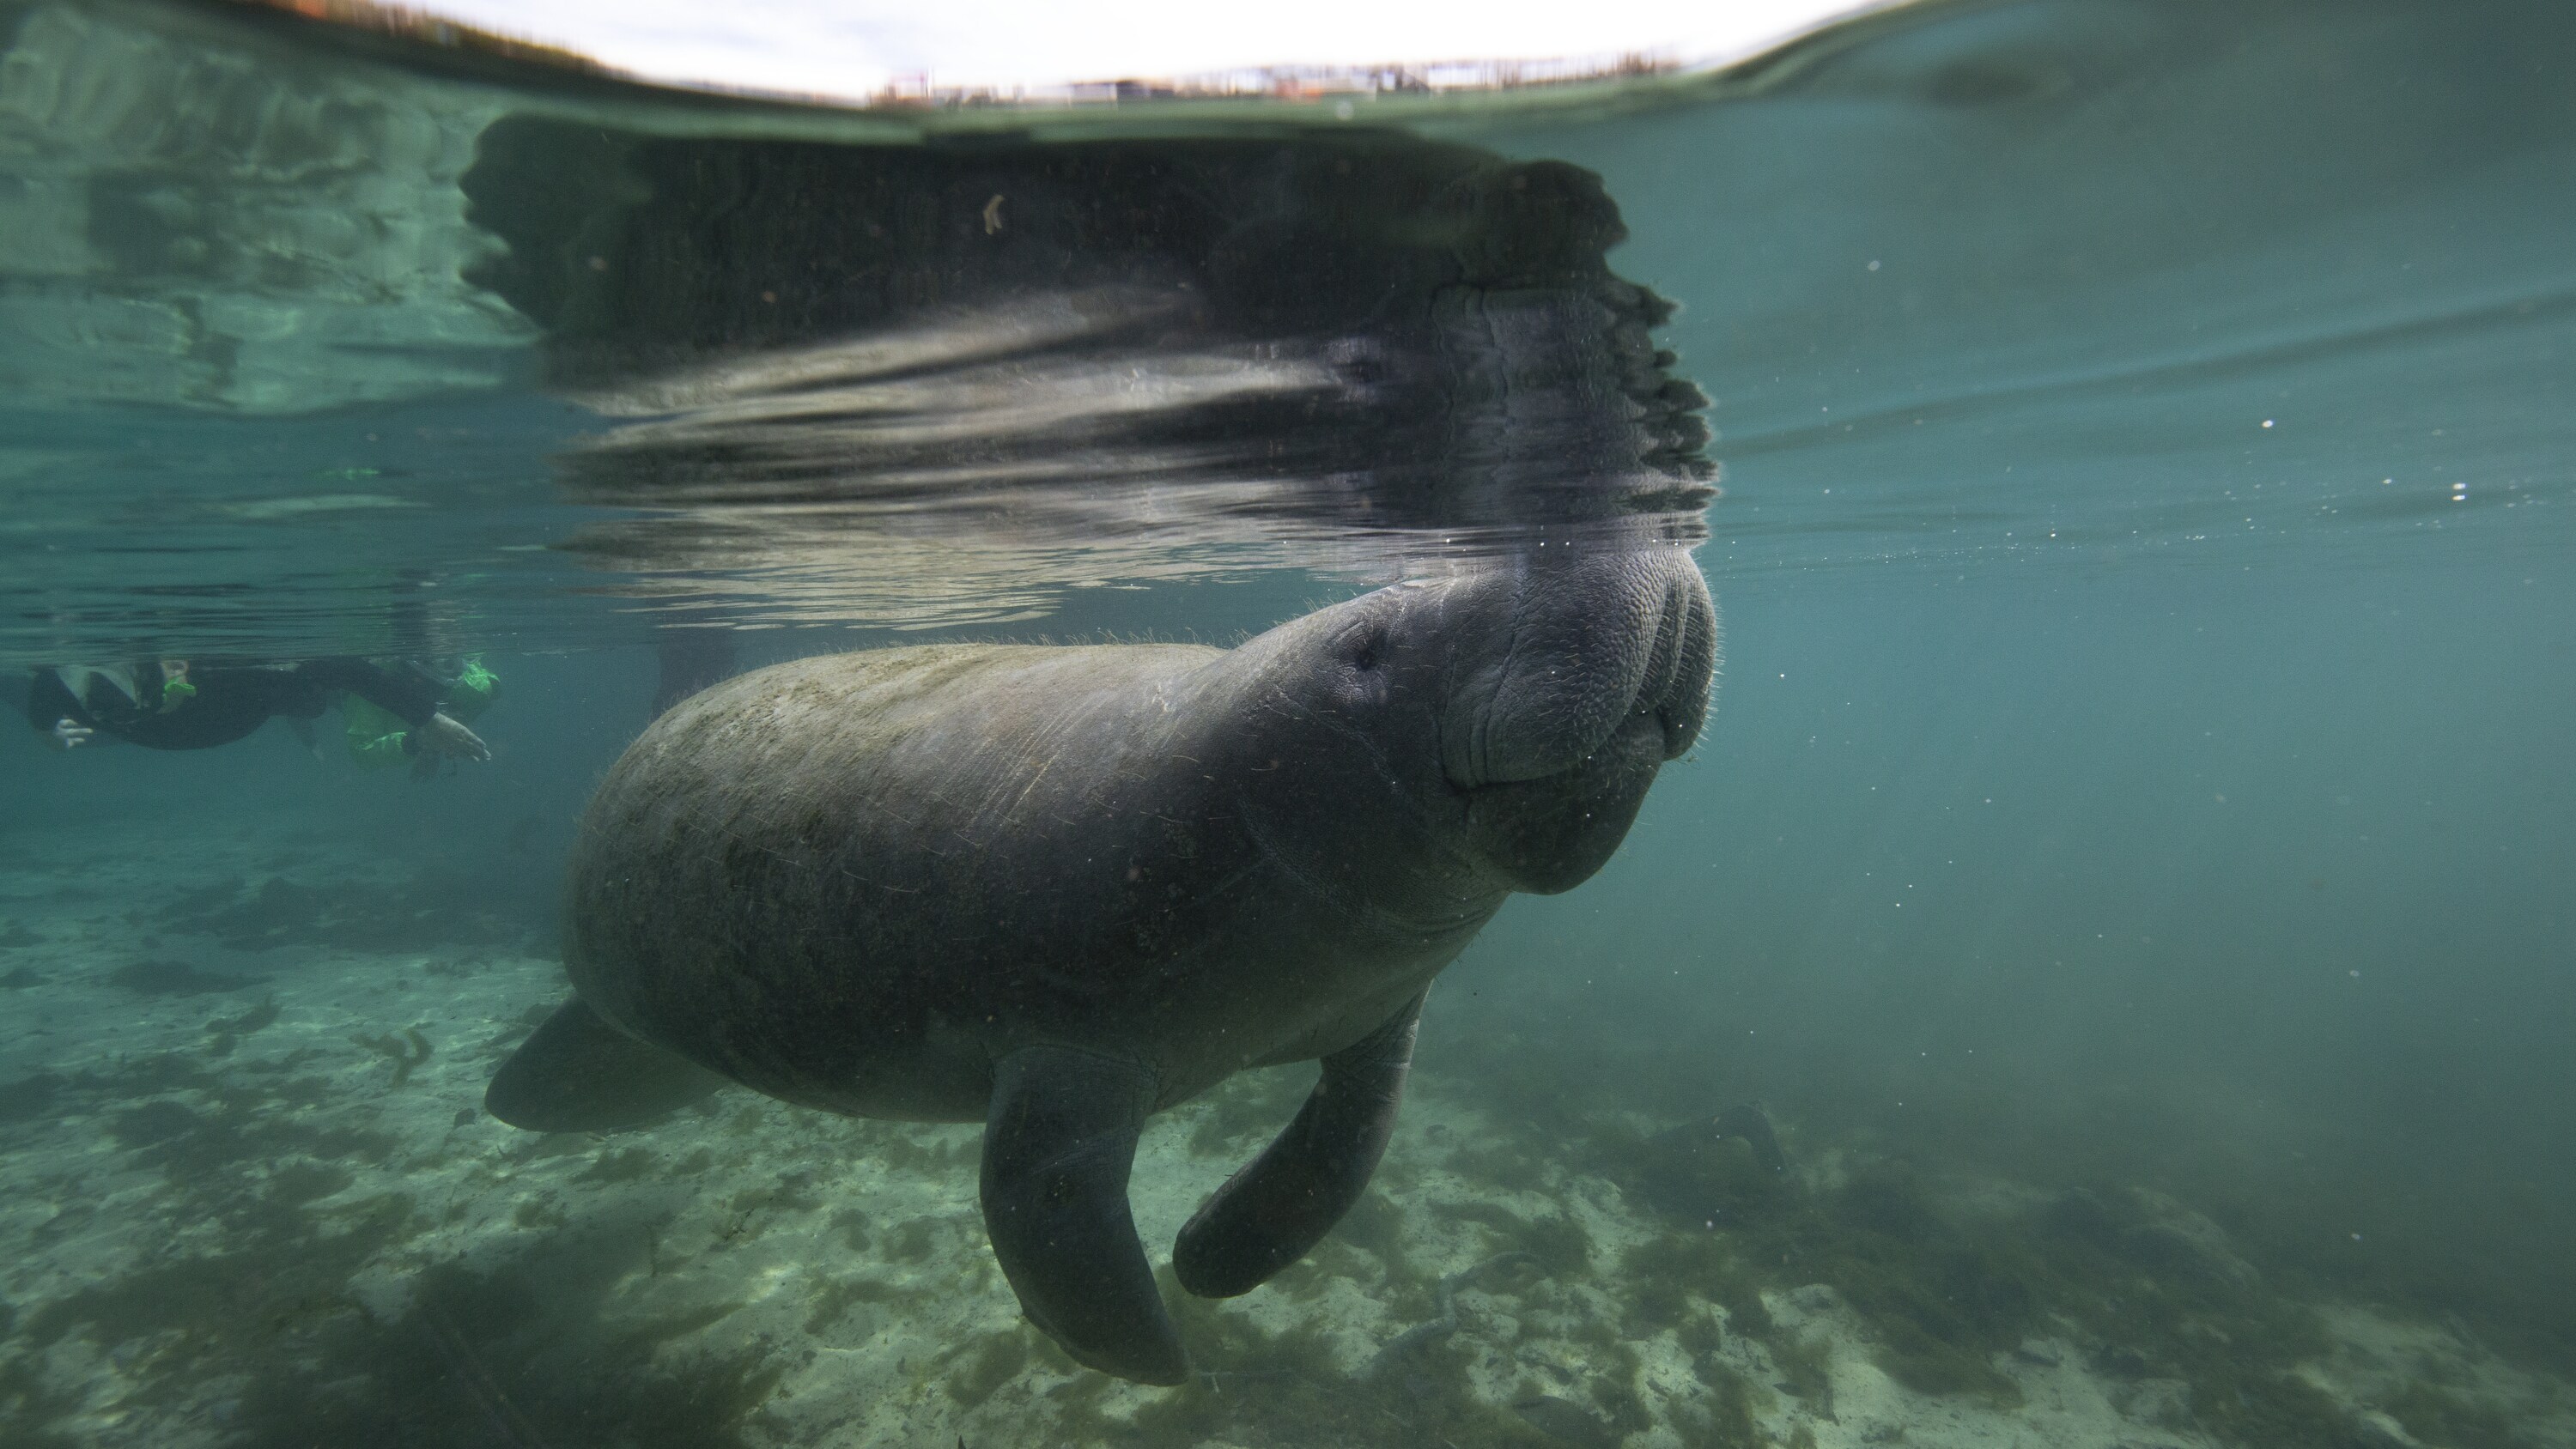 A manatee surfacing to breathe. (National Geographic for Disney+/Phoebe Fitz)